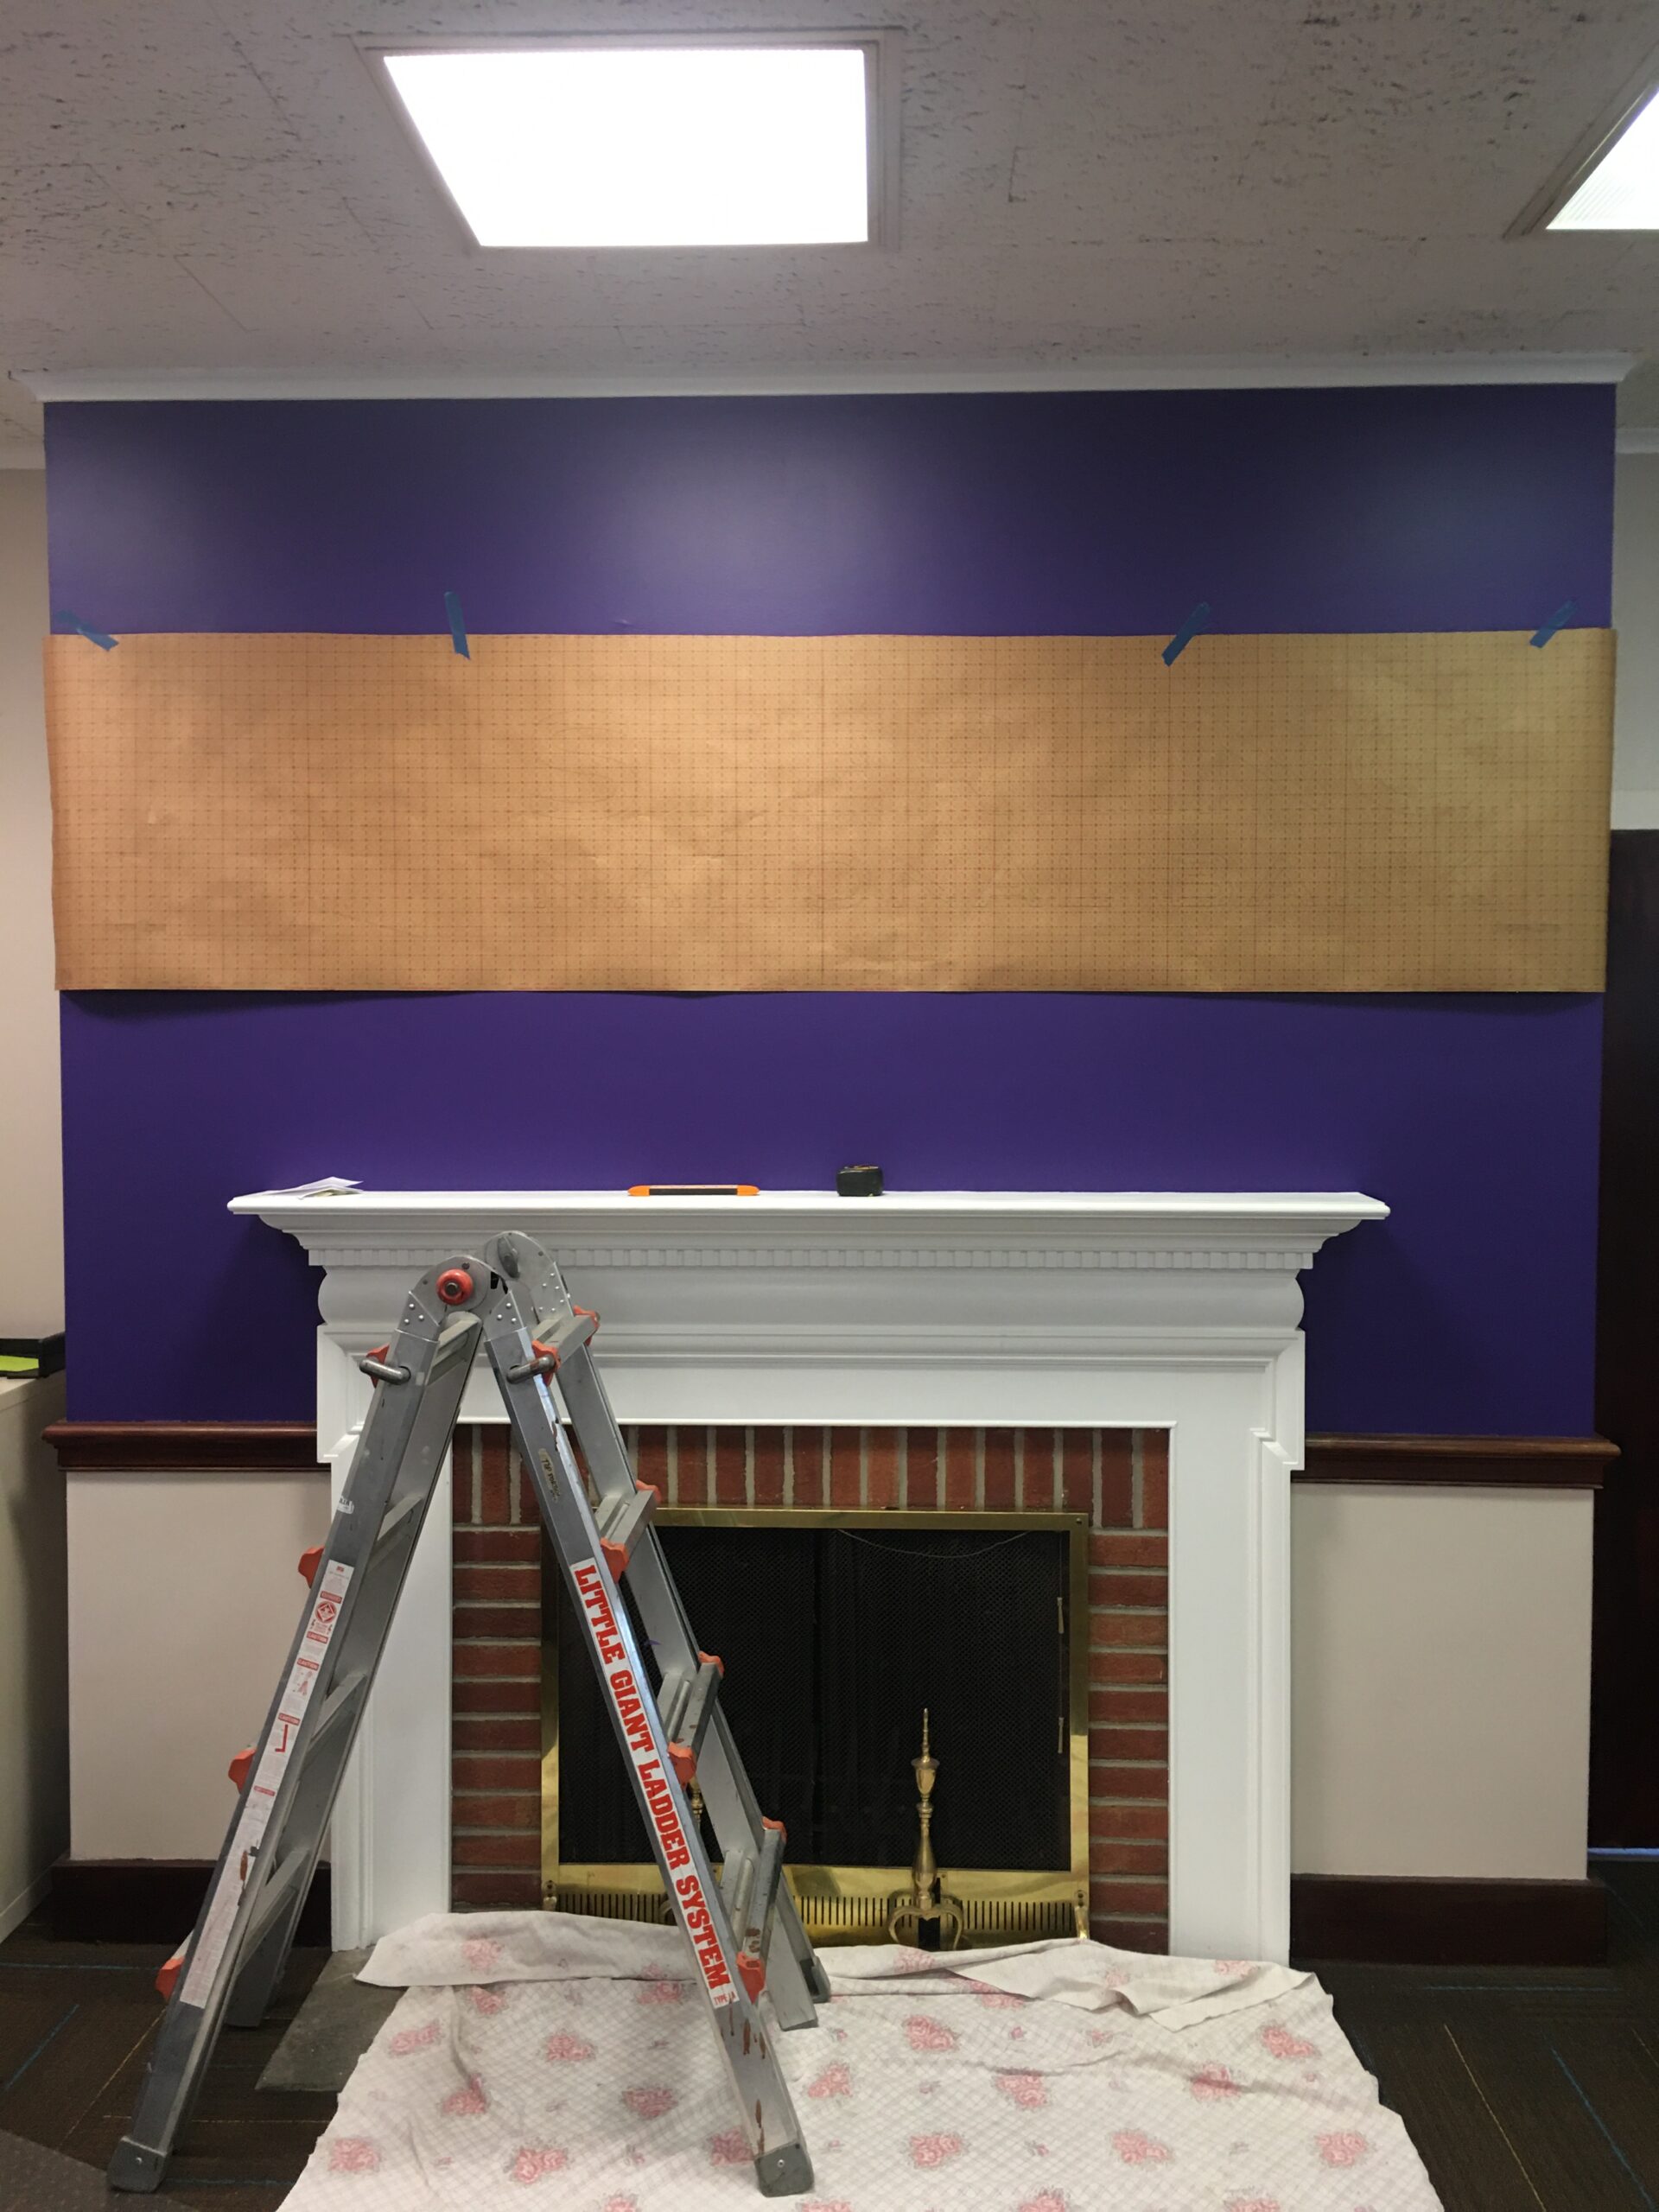 Ladder in front of fireplace installing signage